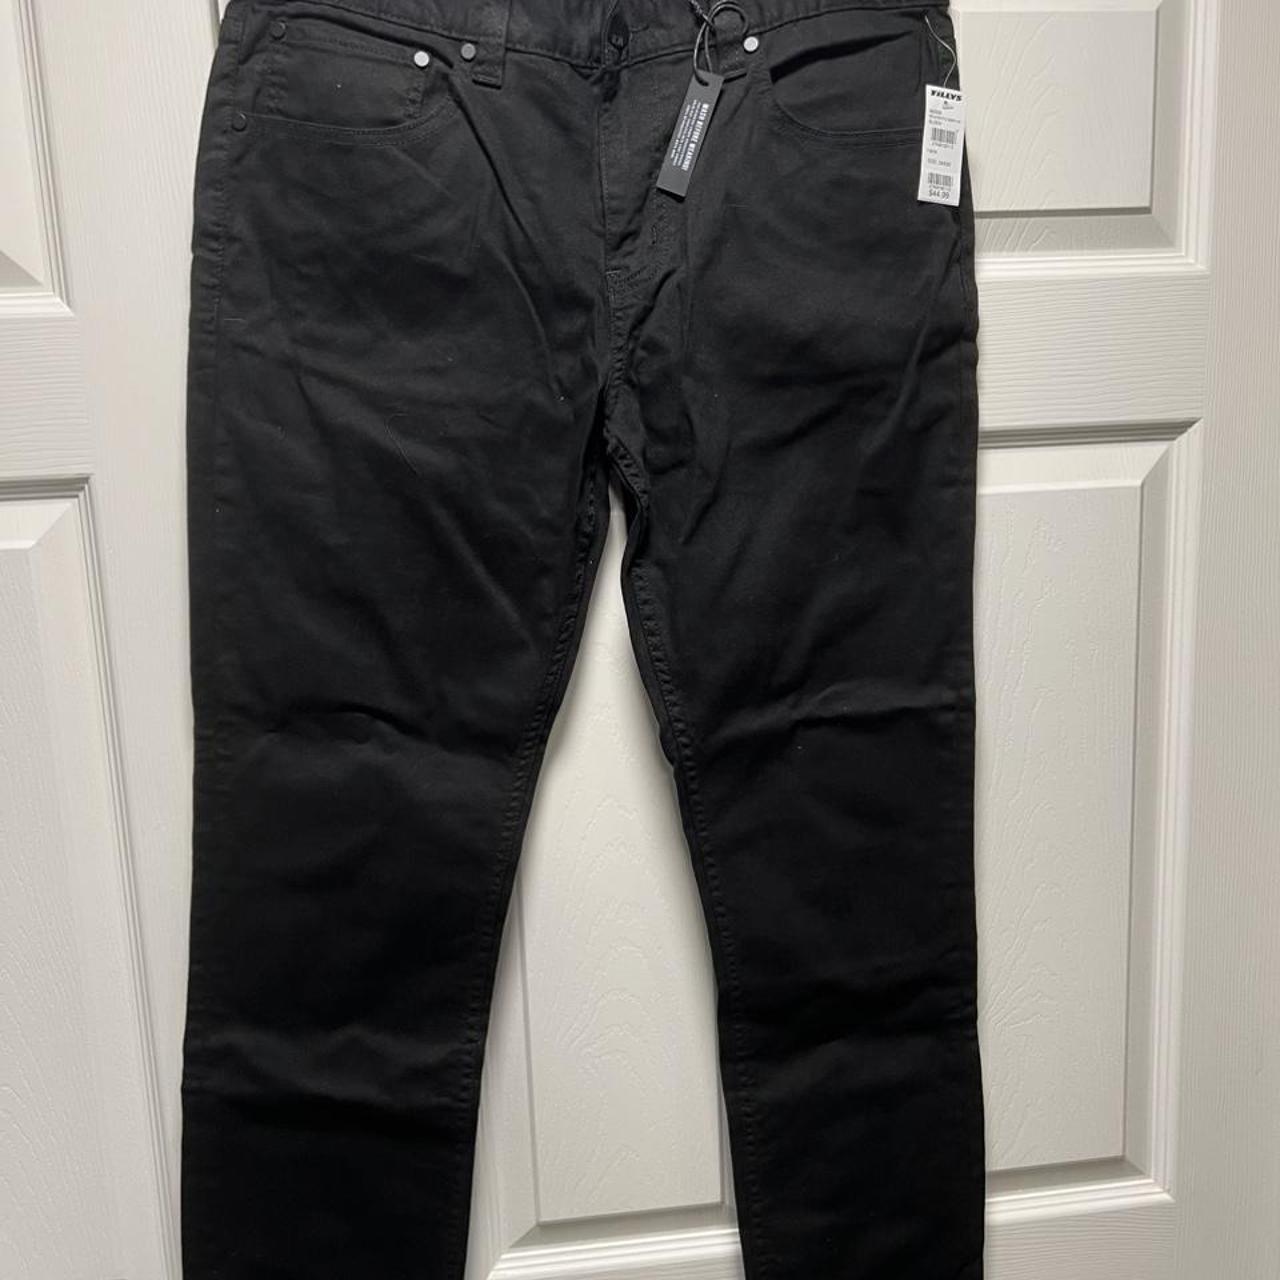 RSQ jeans. Brand new with tags never worn. Seattle... - Depop